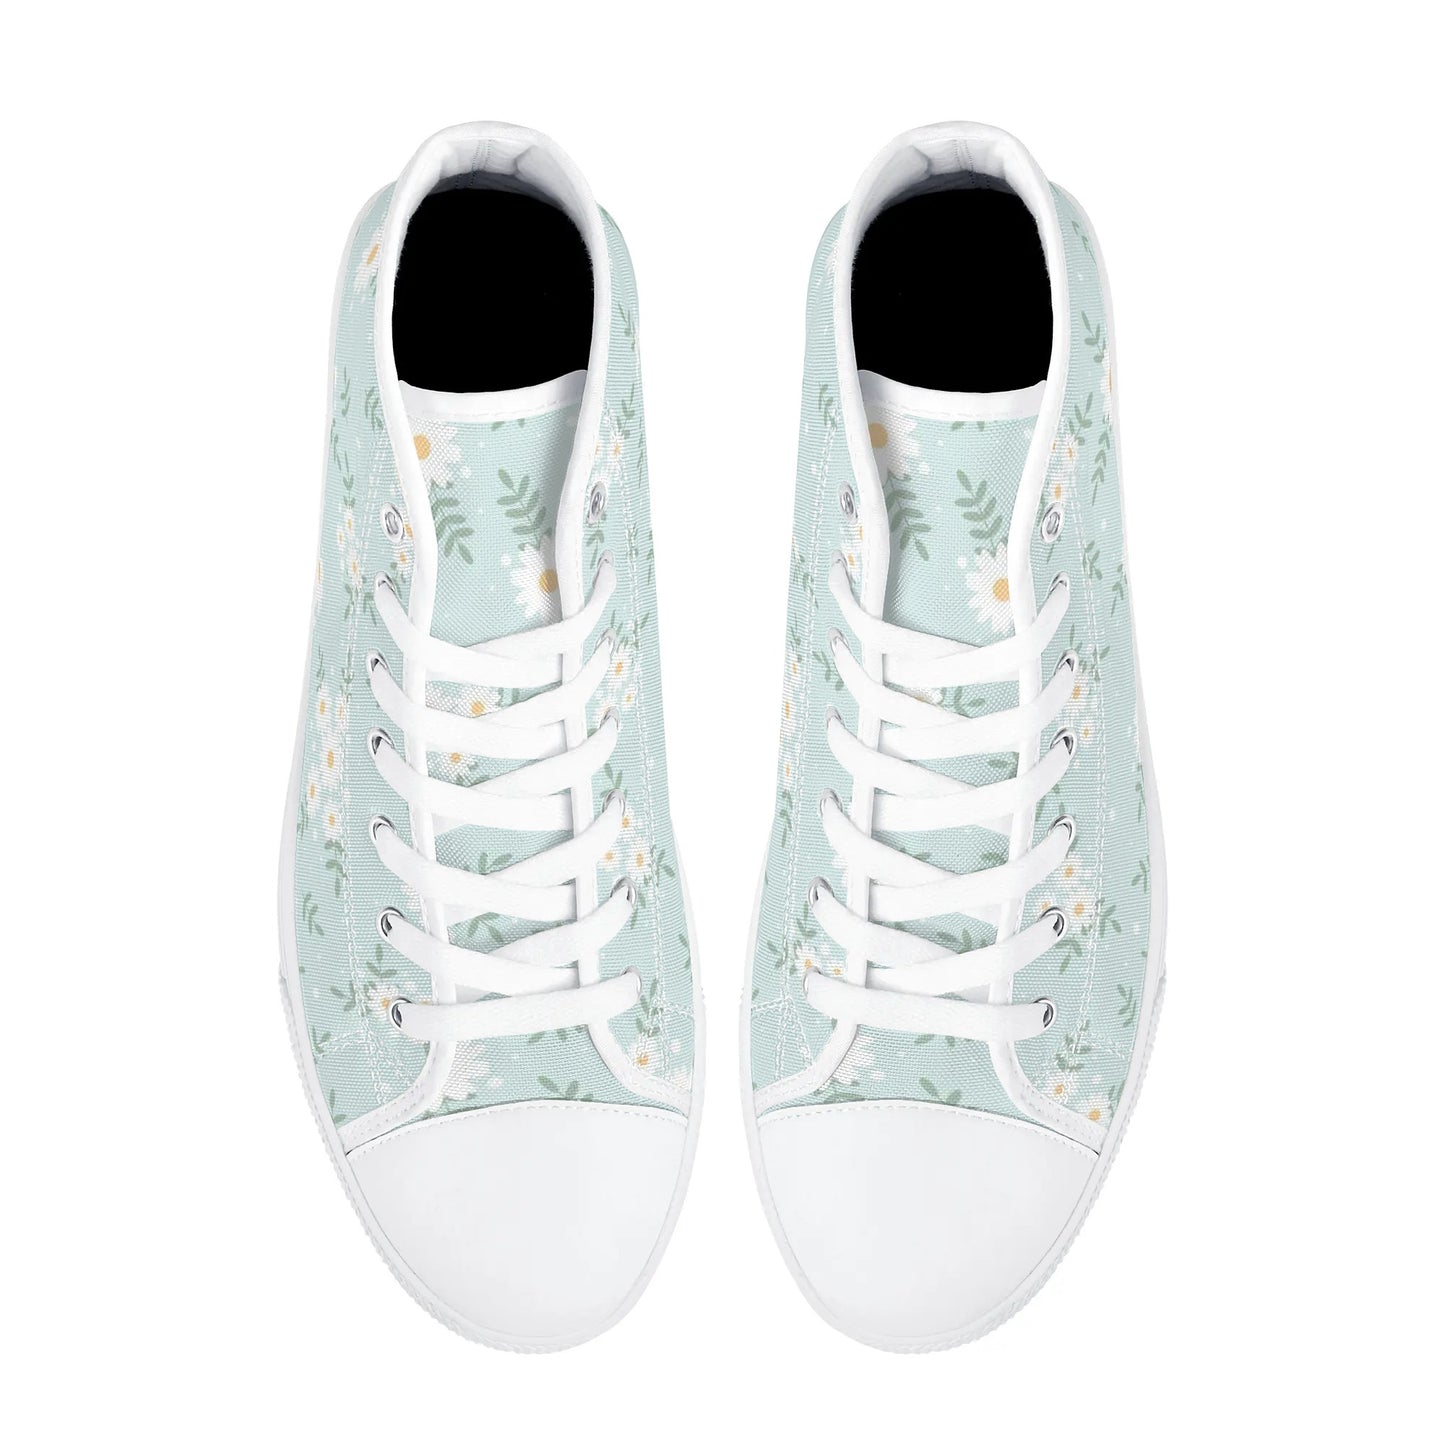 Daisy Women High Top Shoes, Blue Floral Lace Up Sneakers Footwear Canvas Streetwear Ladies Girls White Trainers Designer Gift